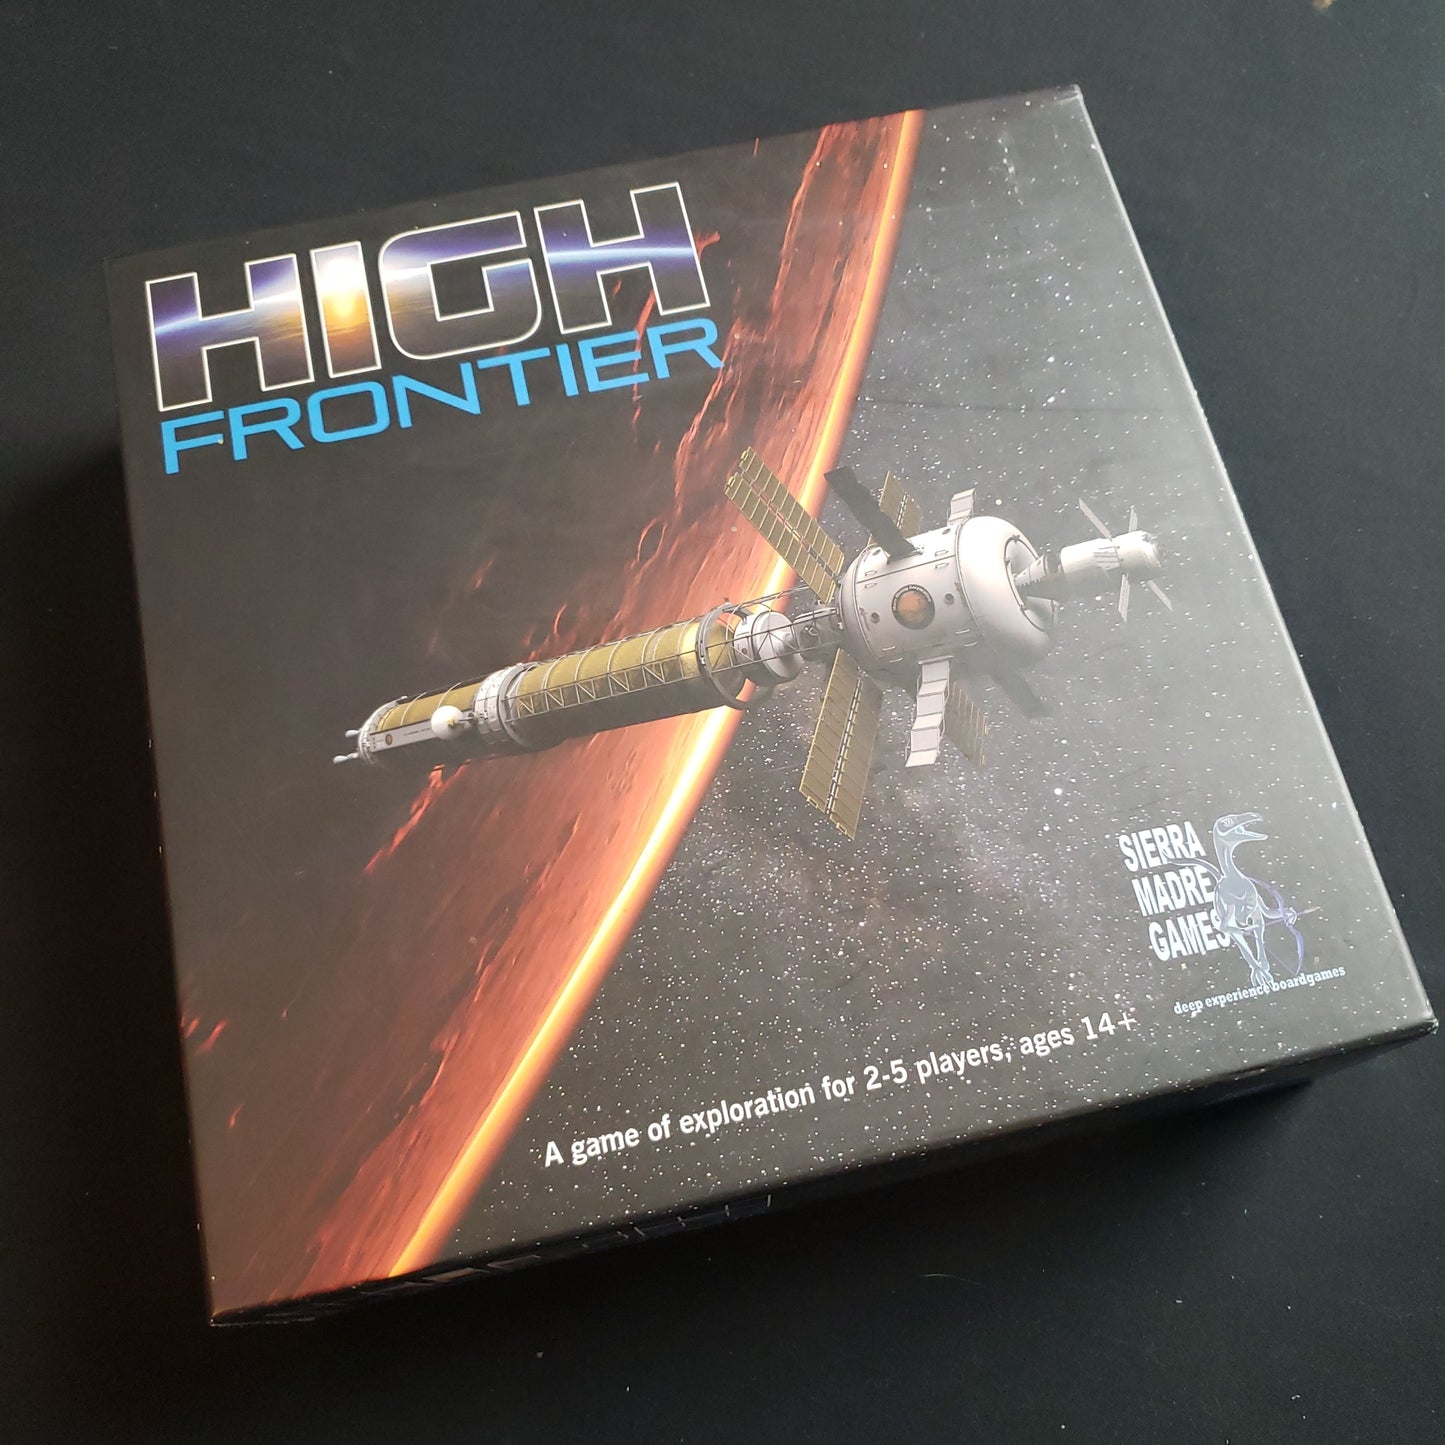 Image shows the front cover of the box of the High Frontier board game